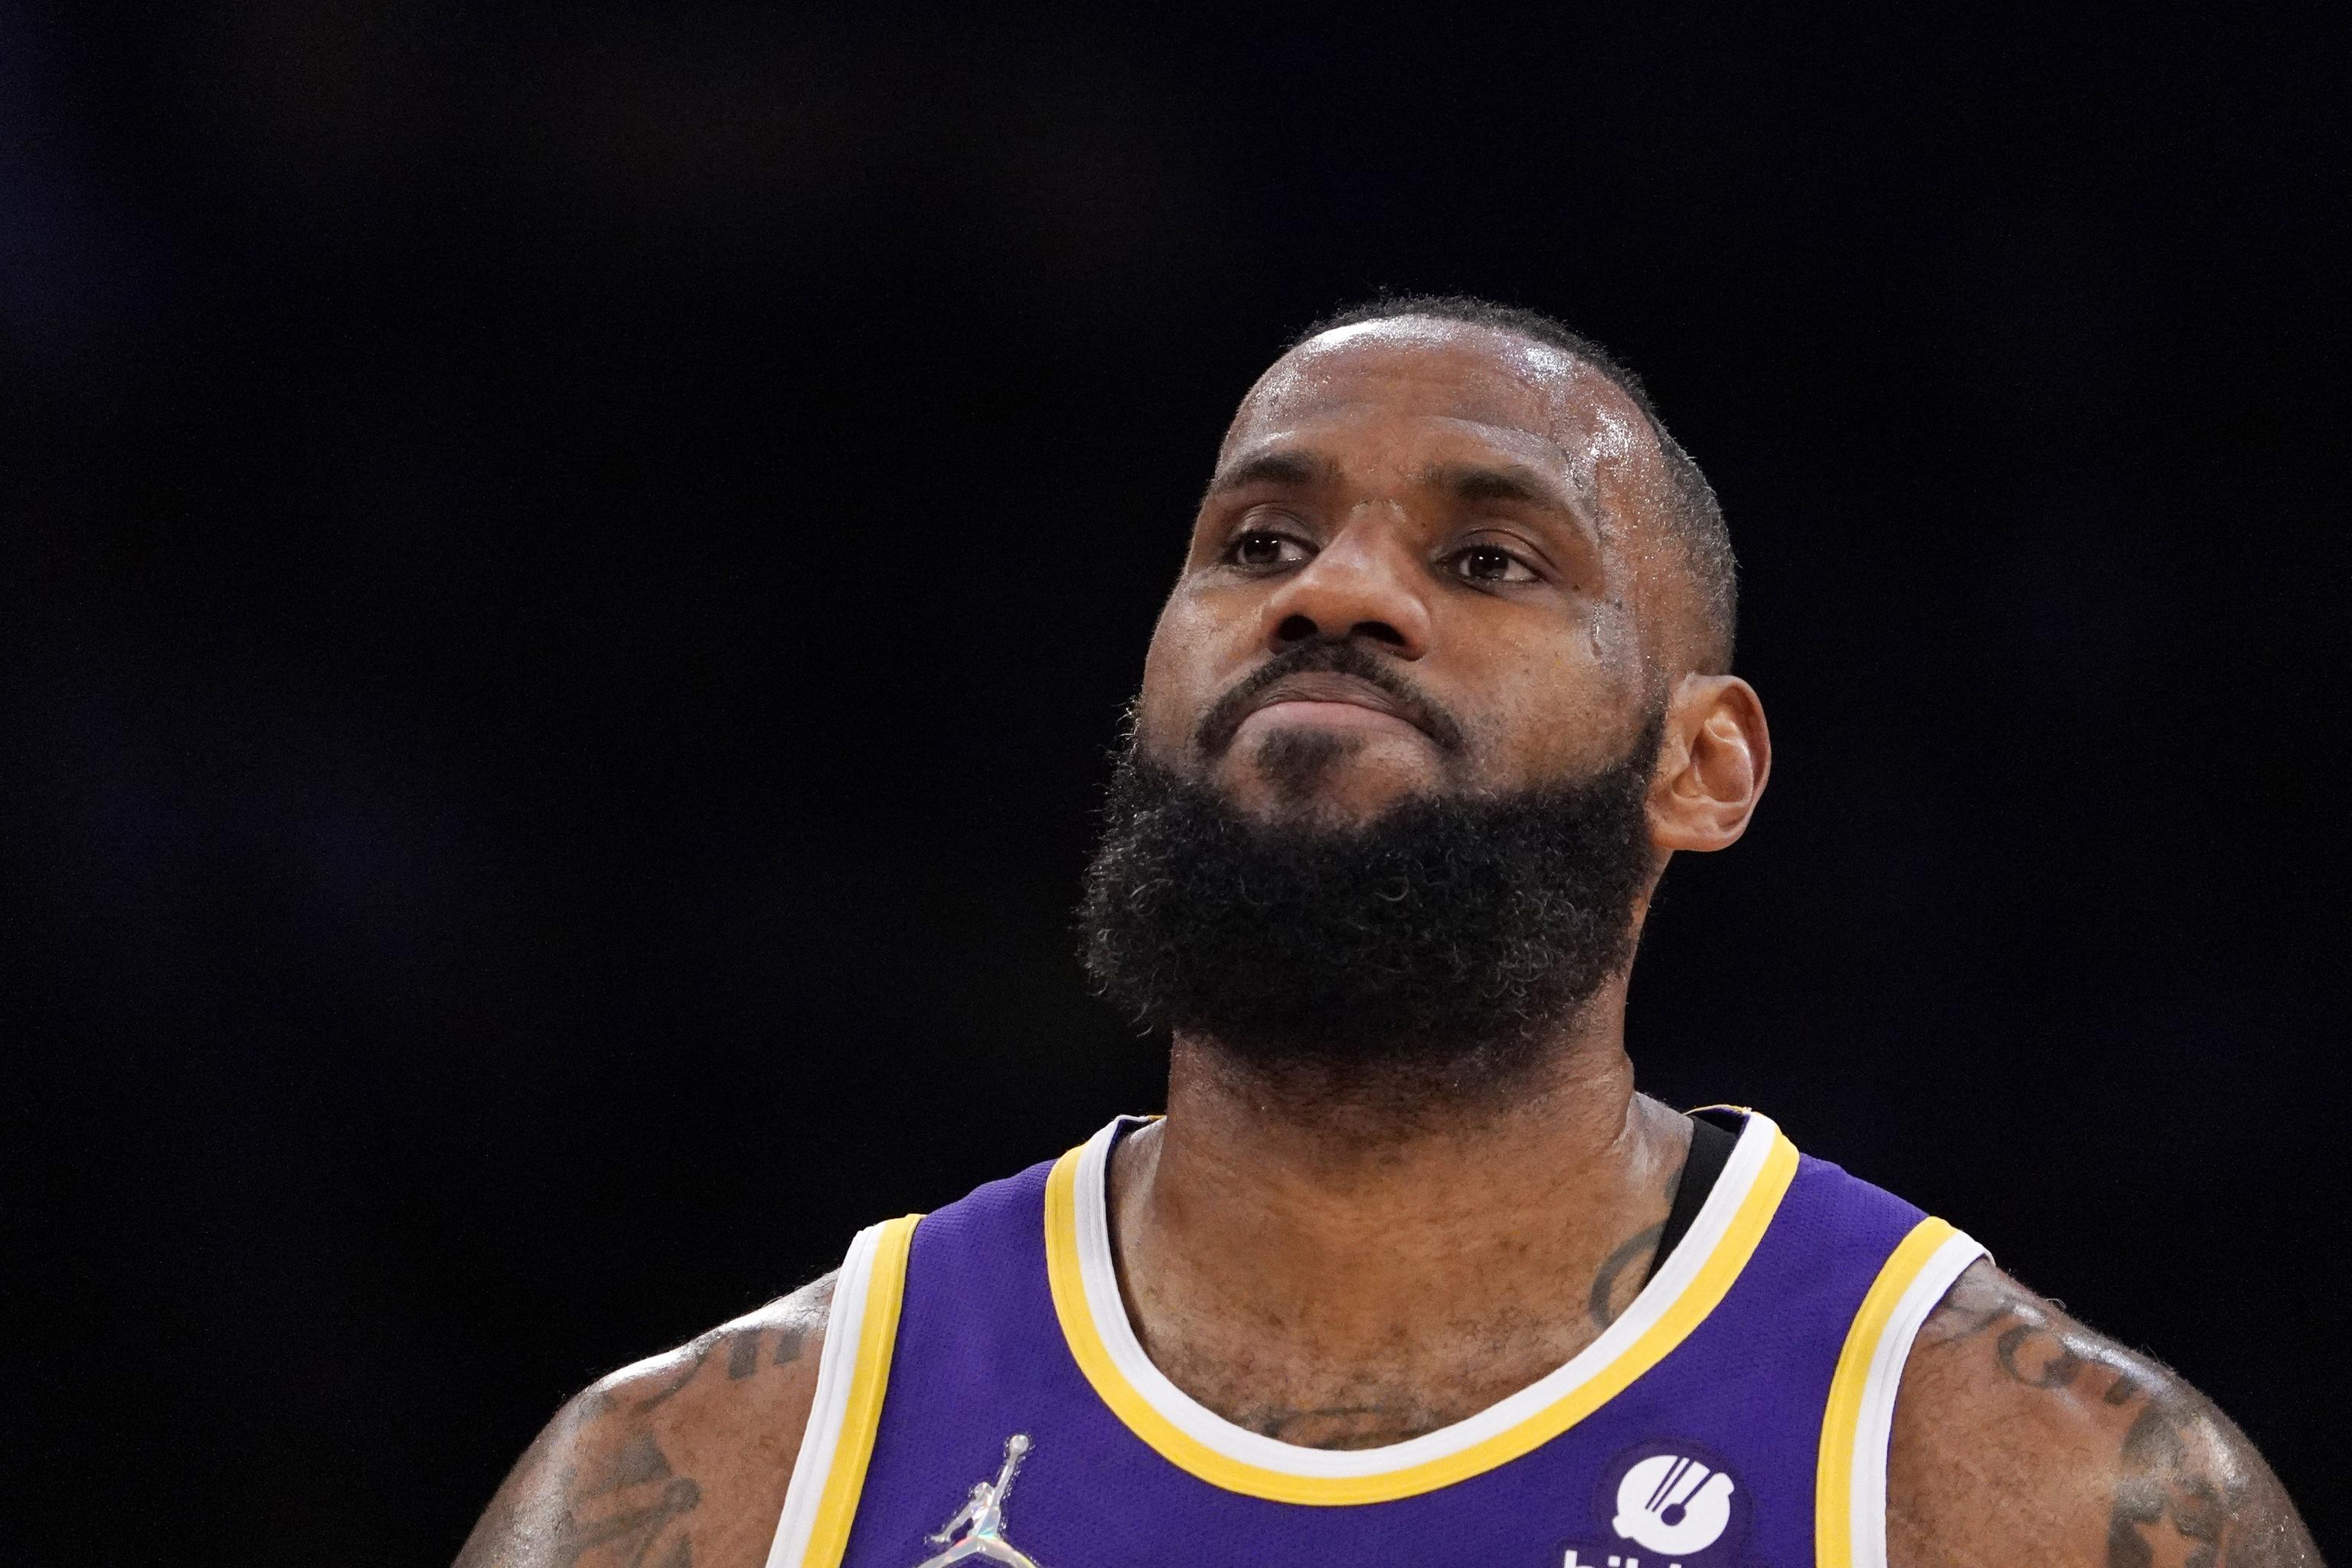 Reports: LeBron James agrees to two-year extension with Los Angeles Lakers